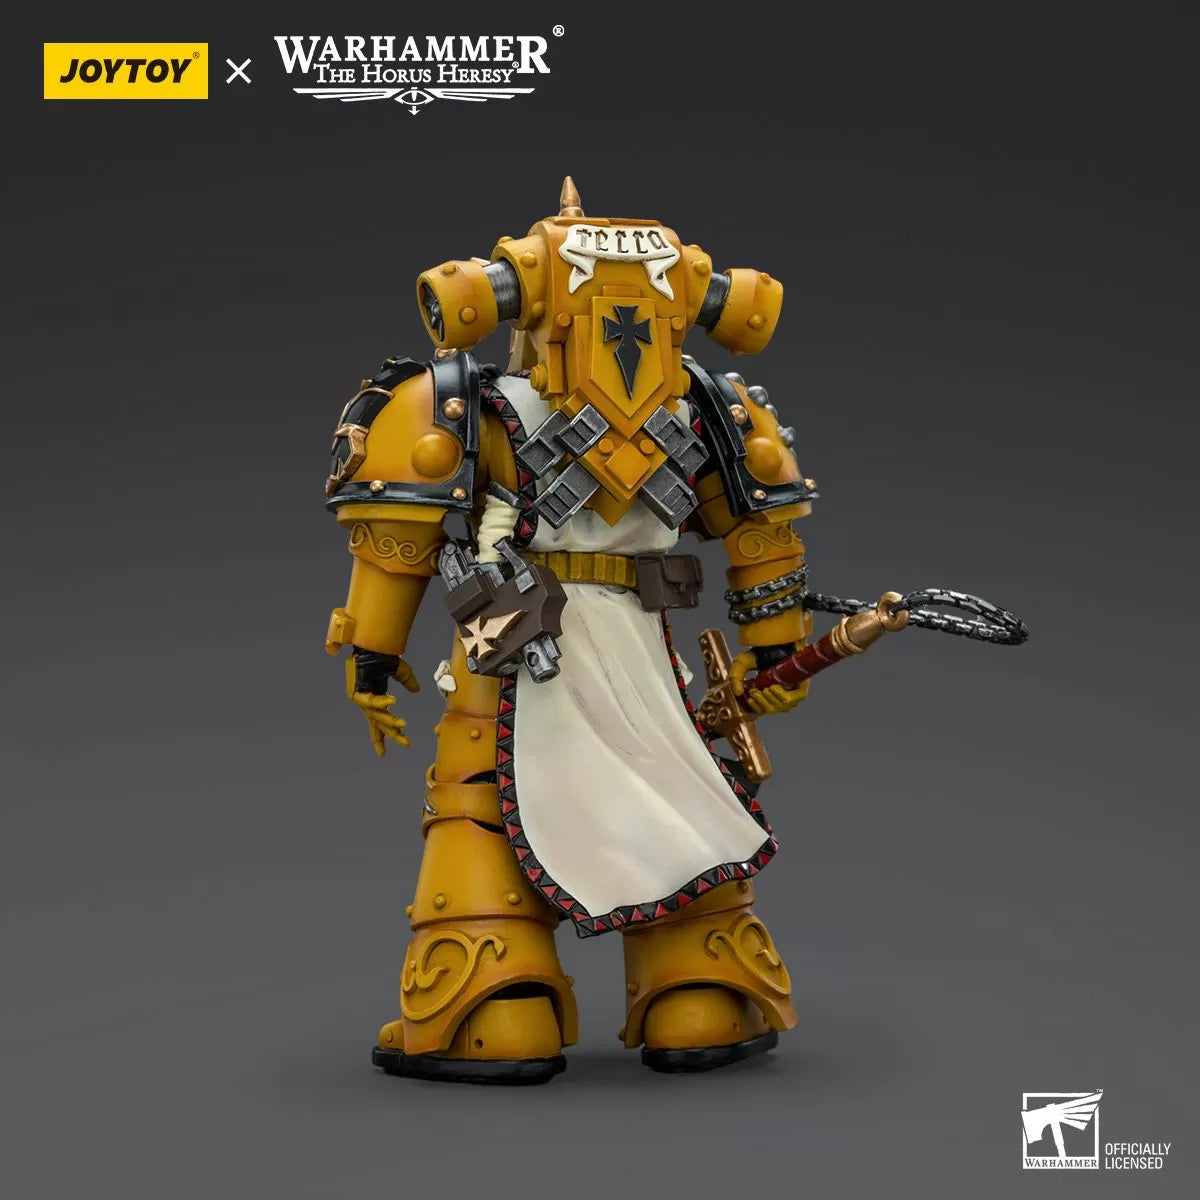 Warhammer Collectibles: 1/18 Scale Imperial Fists Sigismund, First Captain of the Imperial Fists - Preorder